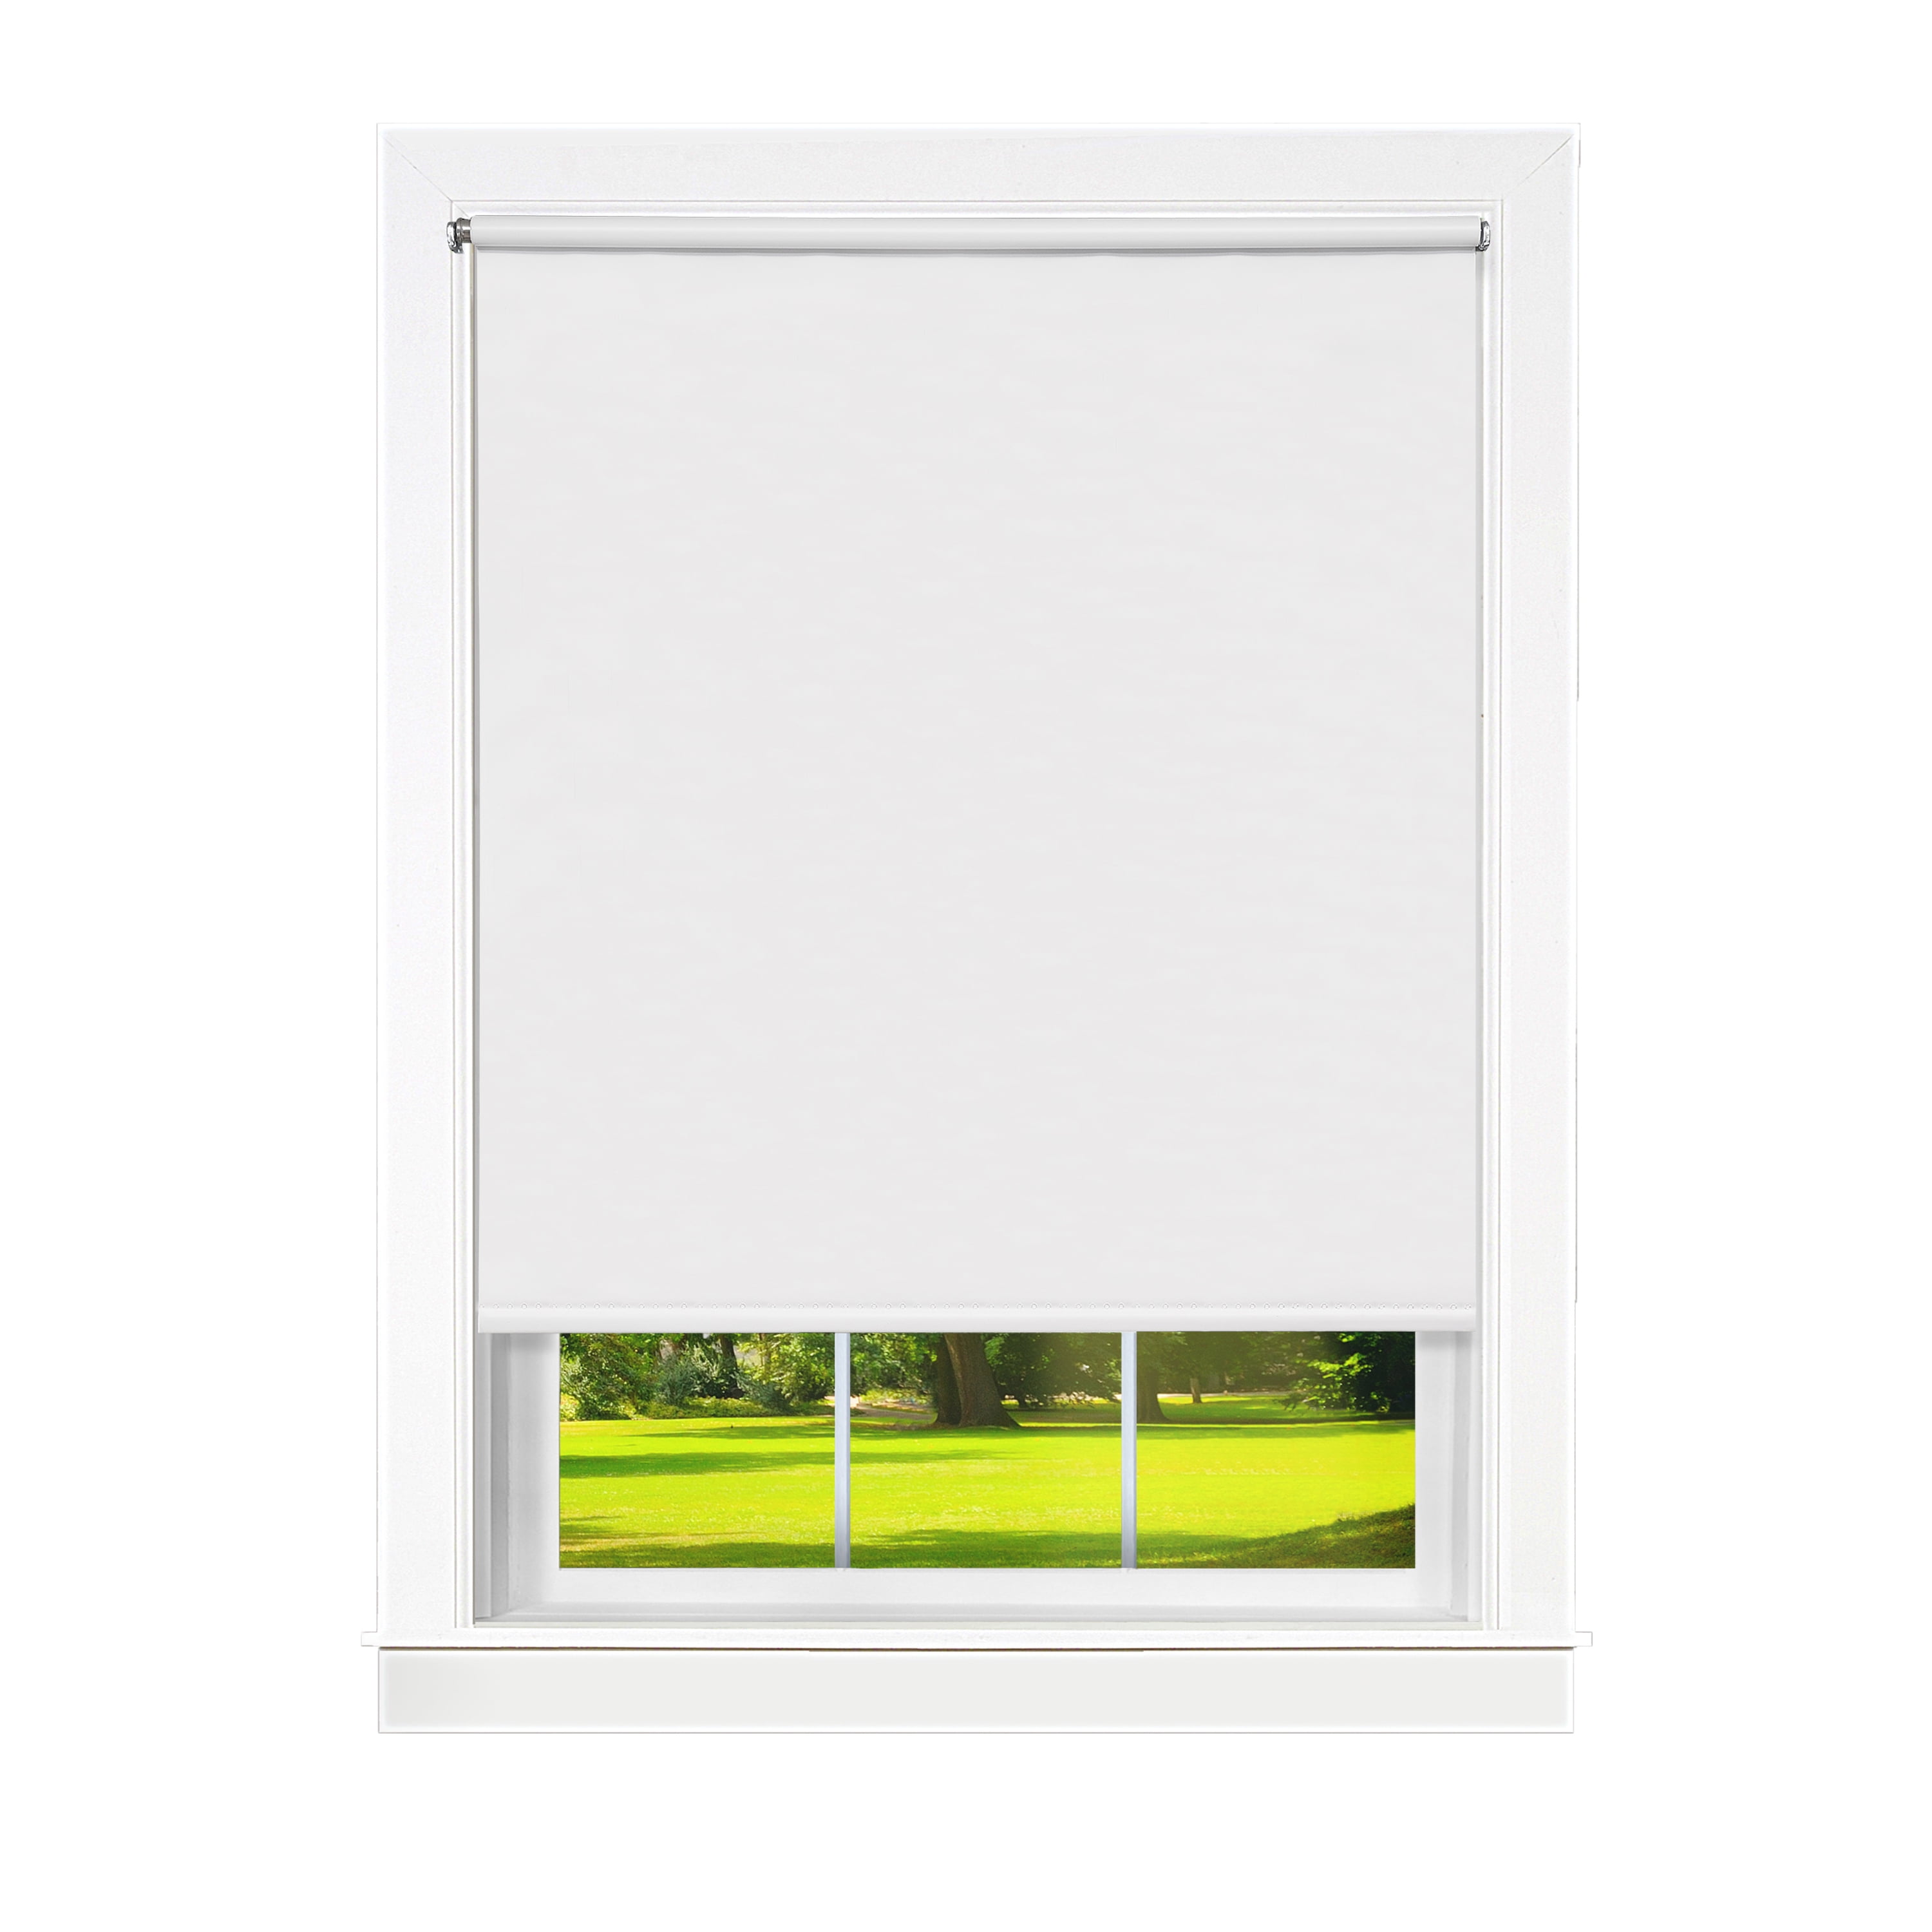 Picture of Achim TRS556WH12 55 x 72 in. Cords Free Tear Down Room Darkening Window Shade, White